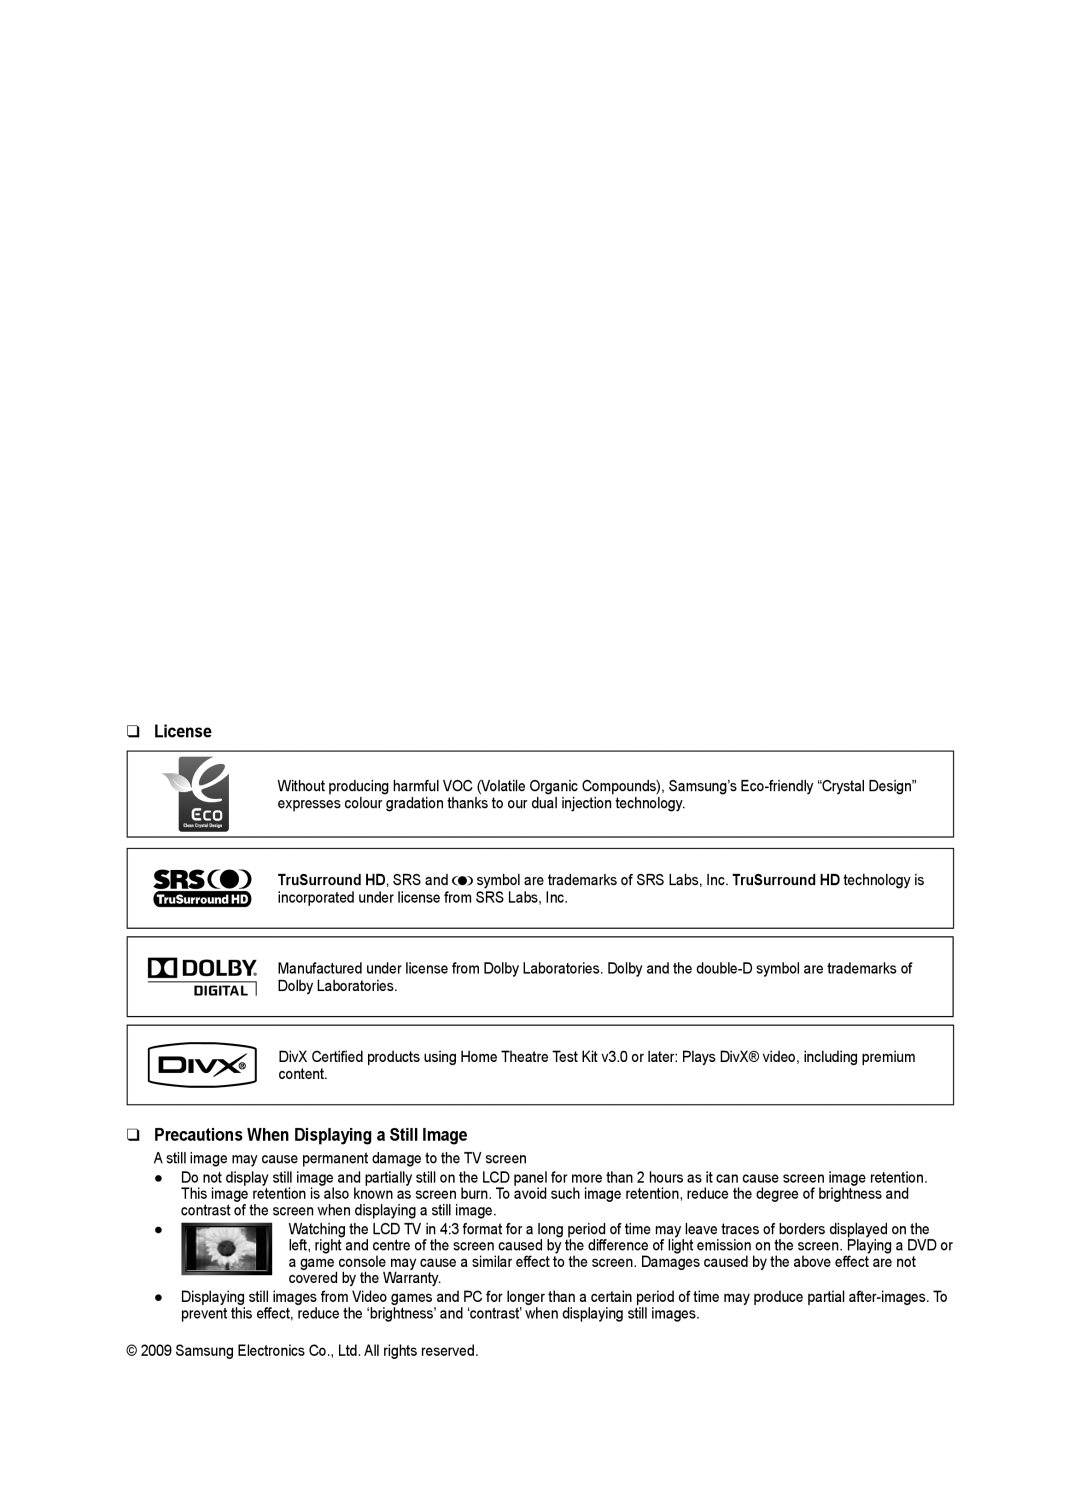 Samsung LA40B750U1R, LA52B750U1R, LA46B750U1R user manual License, Precautions When Displaying a Still Image 